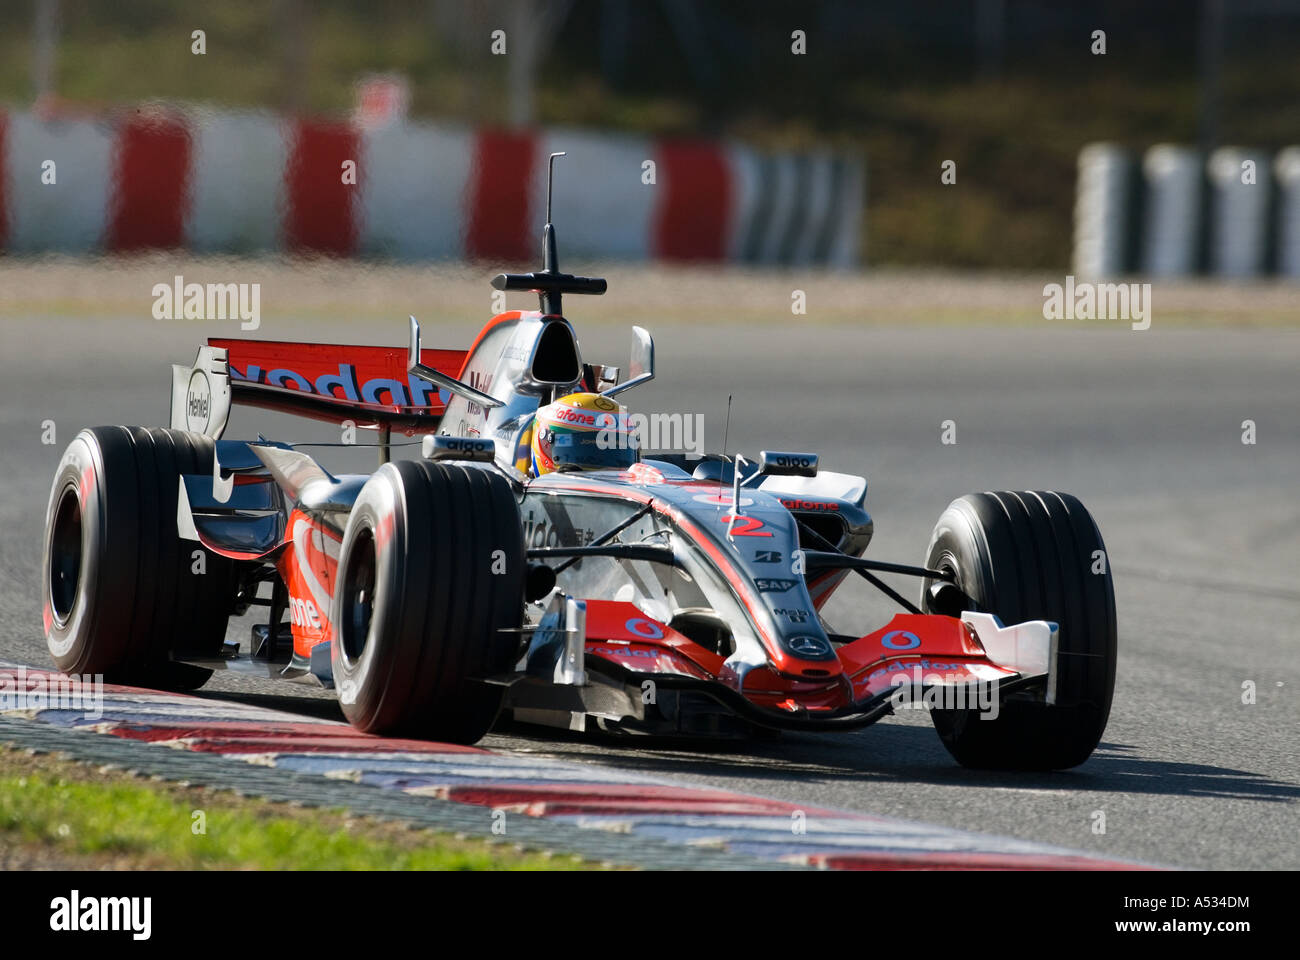 Lewis Hamilton (GB) in the McLaren Mercedes MP4-22 racecar during Formula 1 testing sessions in February 2007 Stock Photo